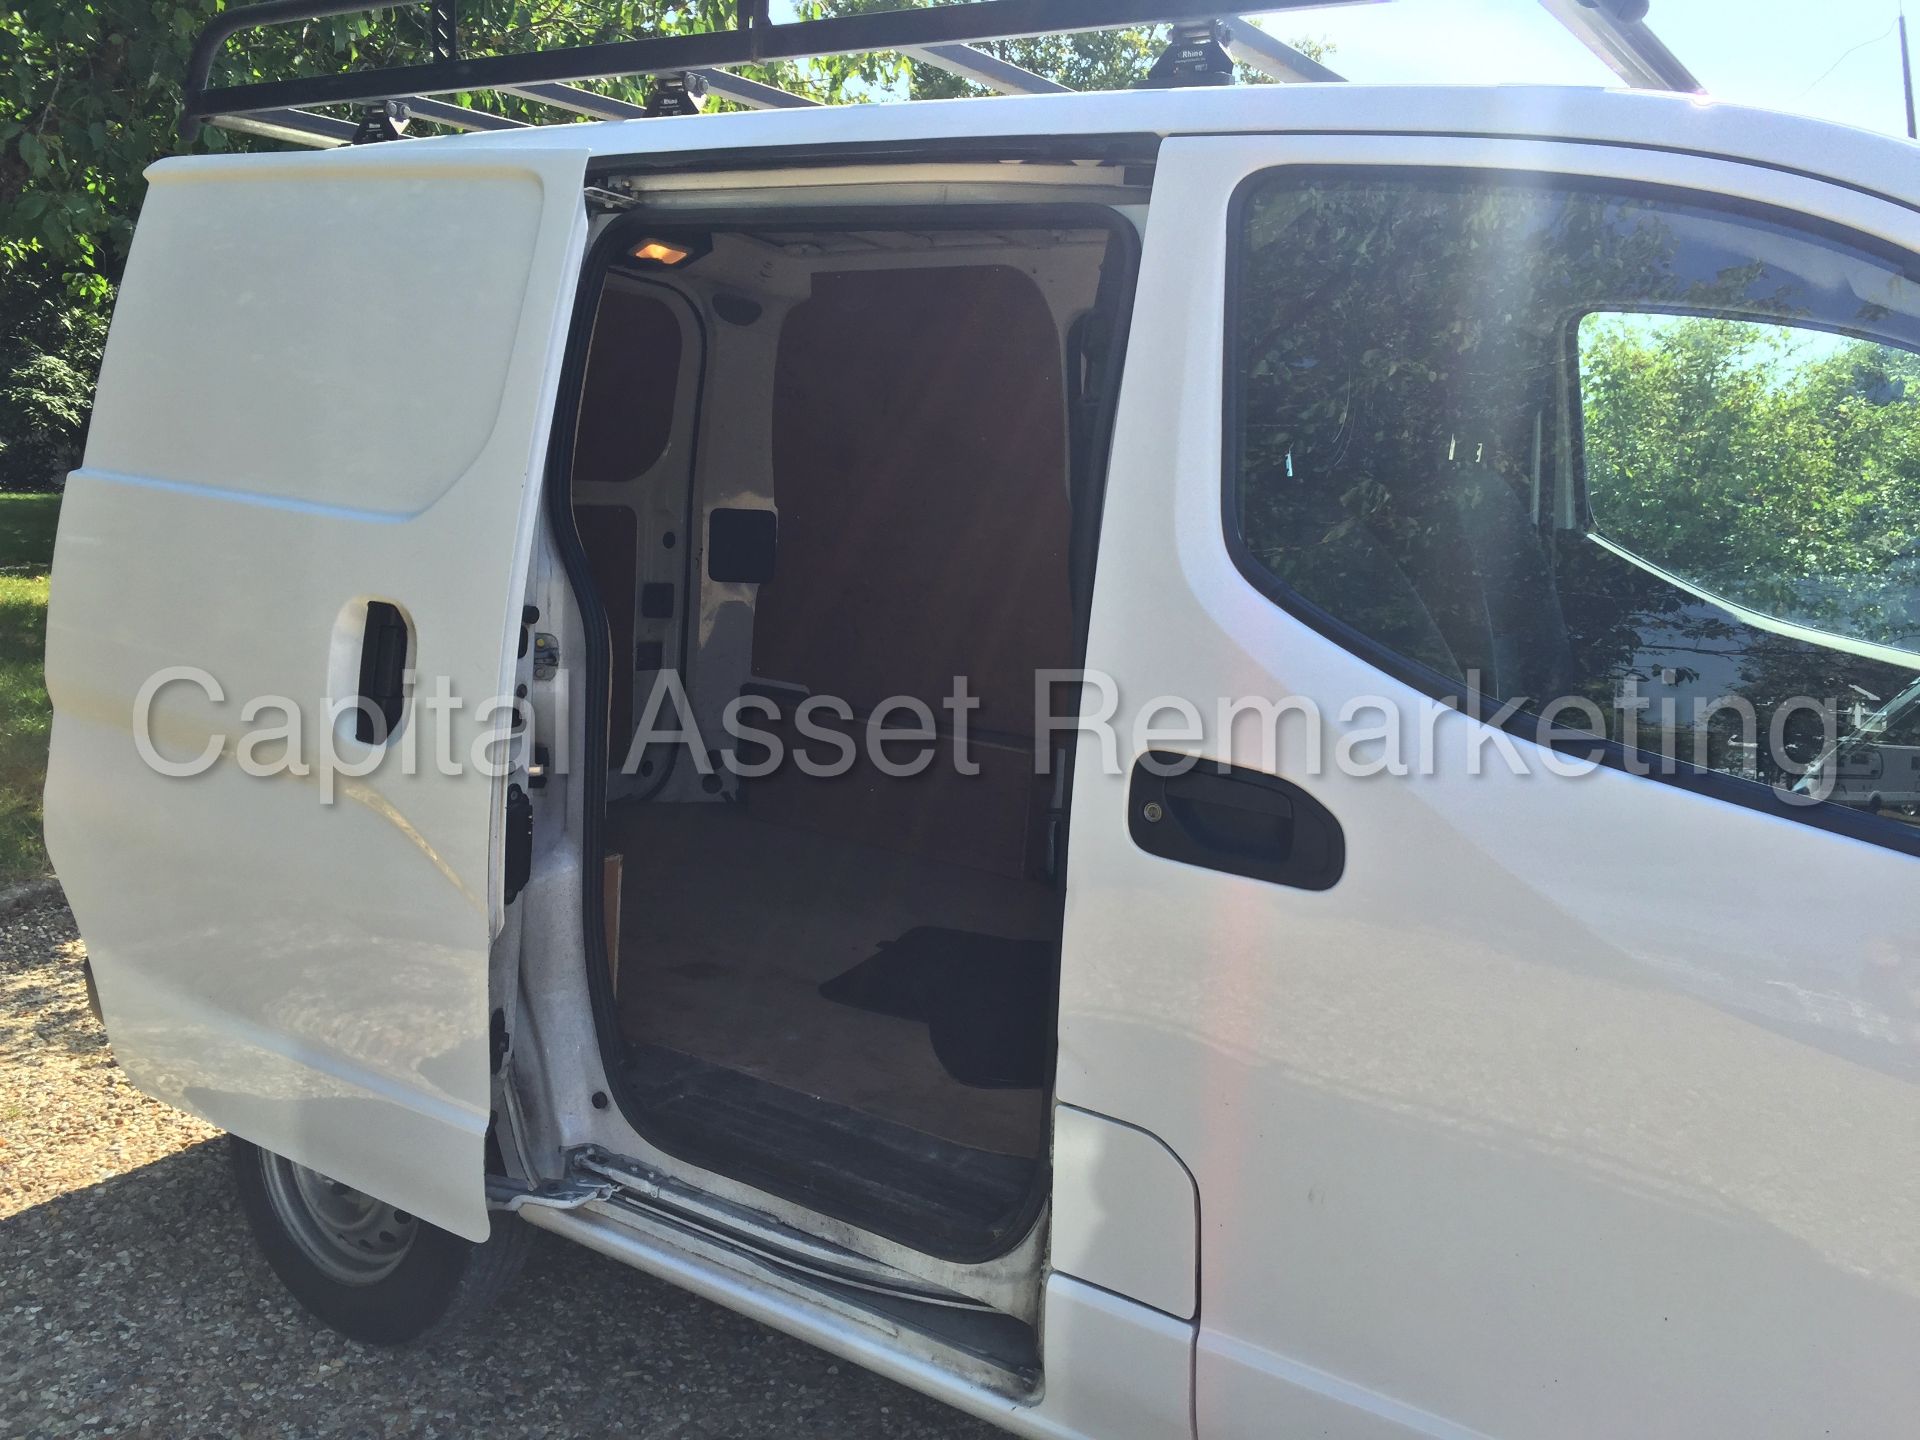 (On Sale) NISSAN NV200 'SE' (2014 MODEL) '1.5 DCI' (1 COMPANY OWNER FROM NEW - FULL SERVICE HISTORY) - Image 12 of 21